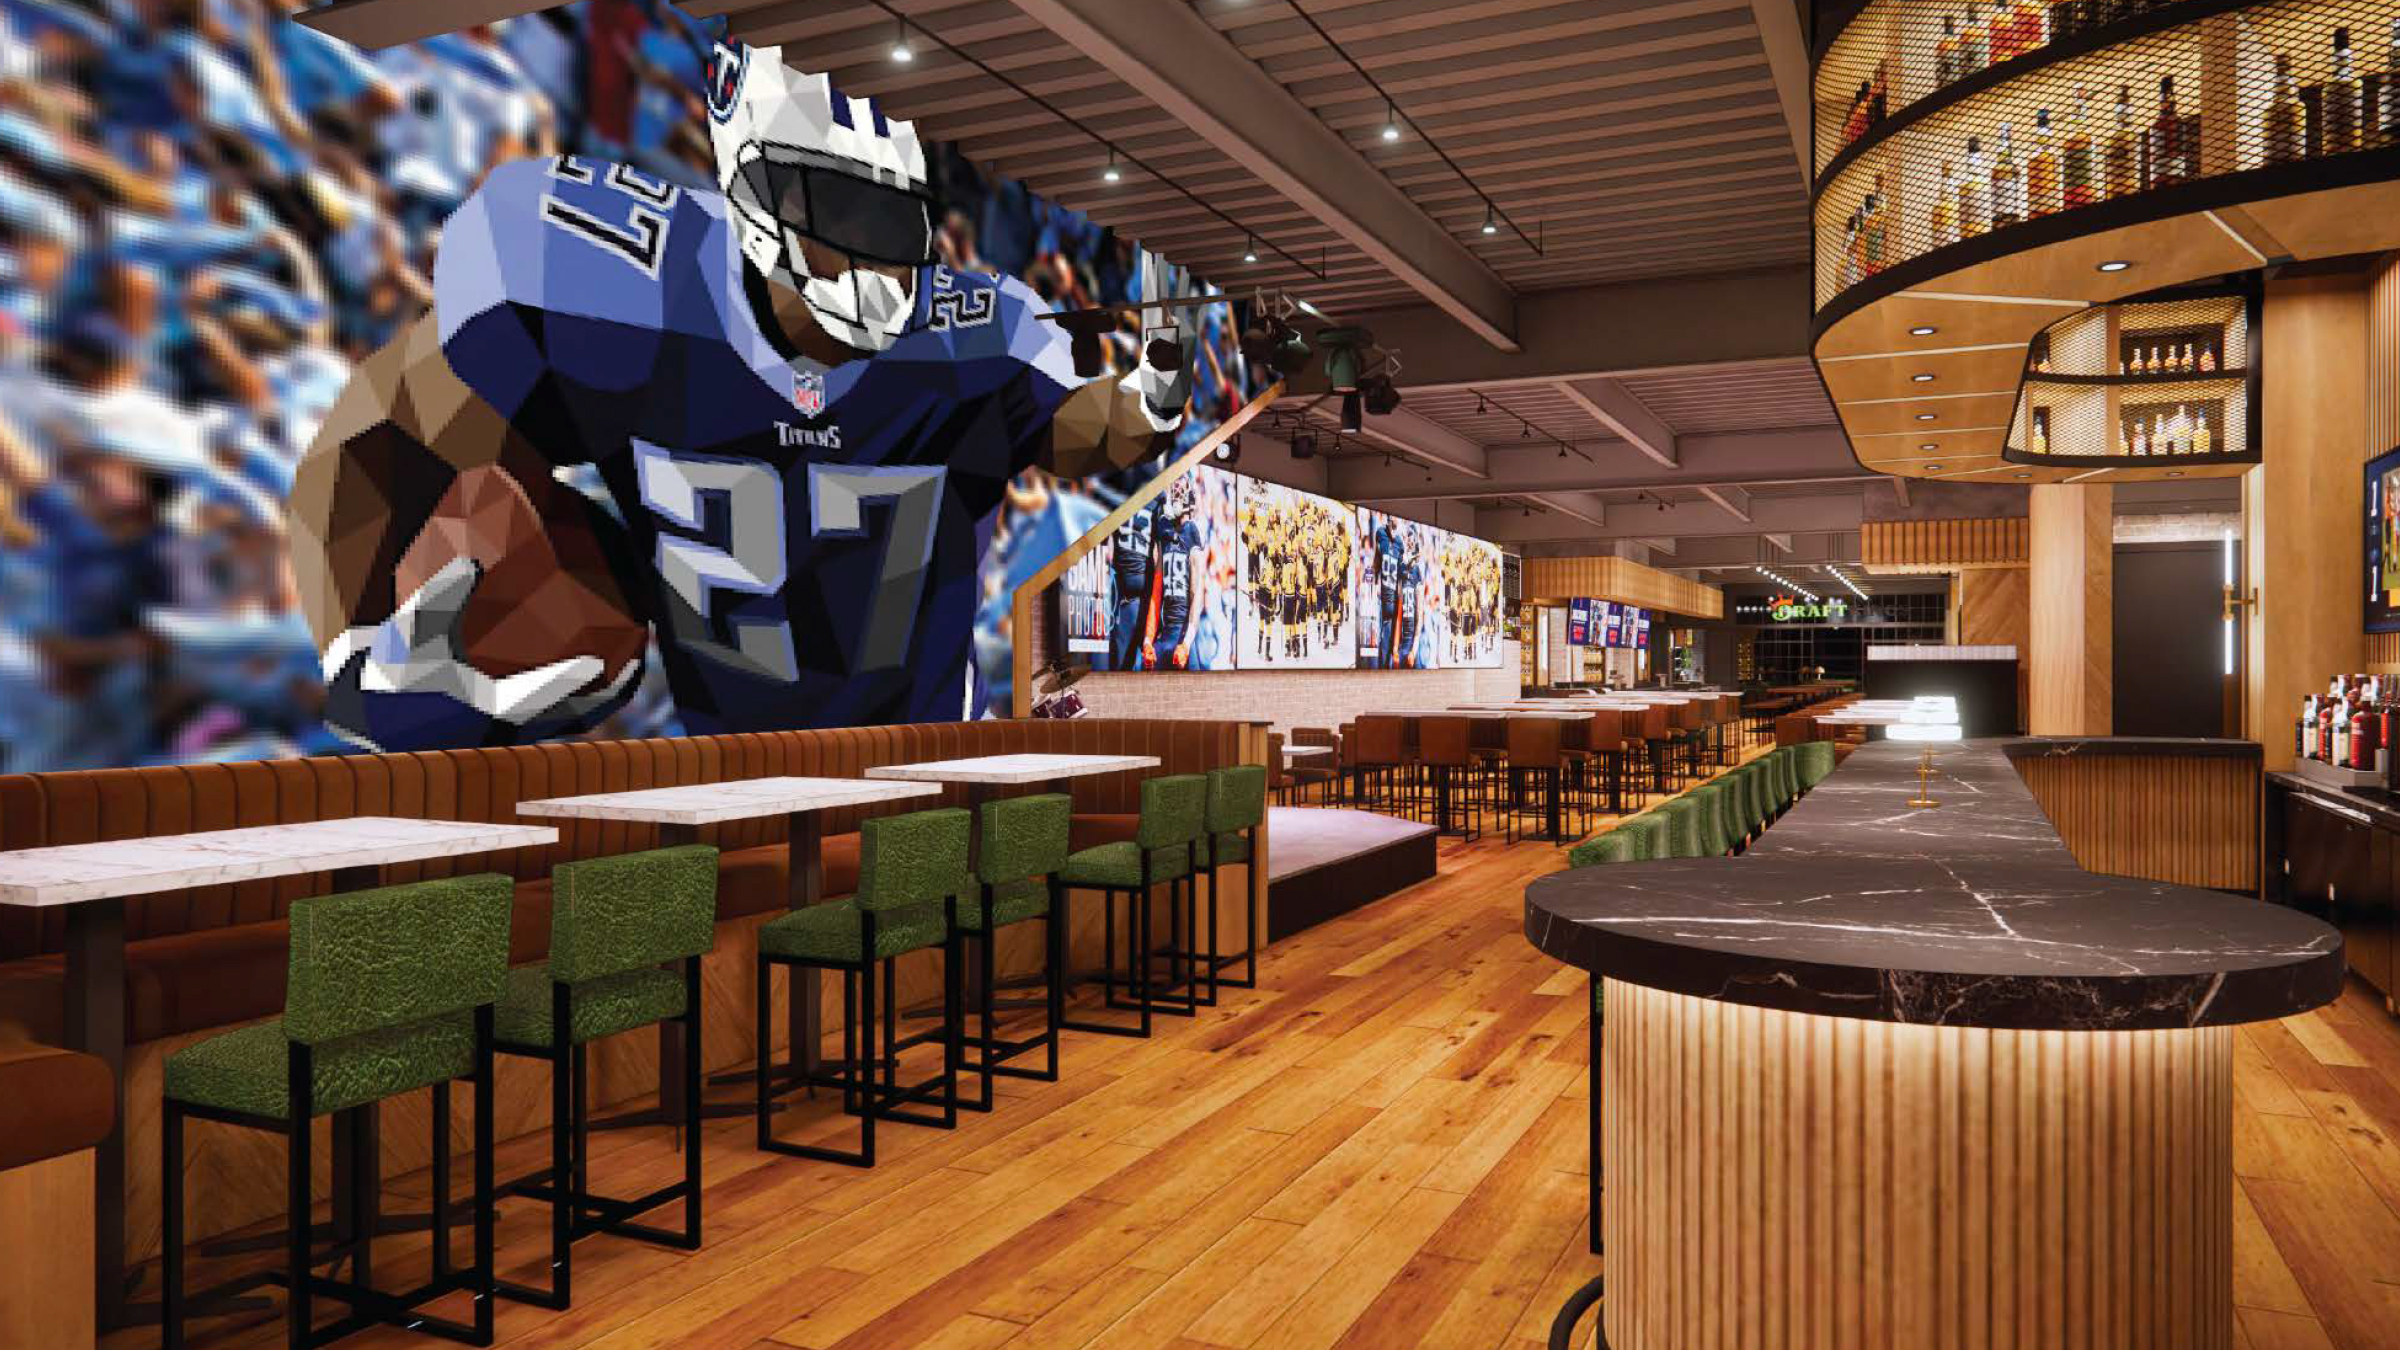 Draftkings Sports & Social Nashville Live! rendering with media wall, bar, and tables.